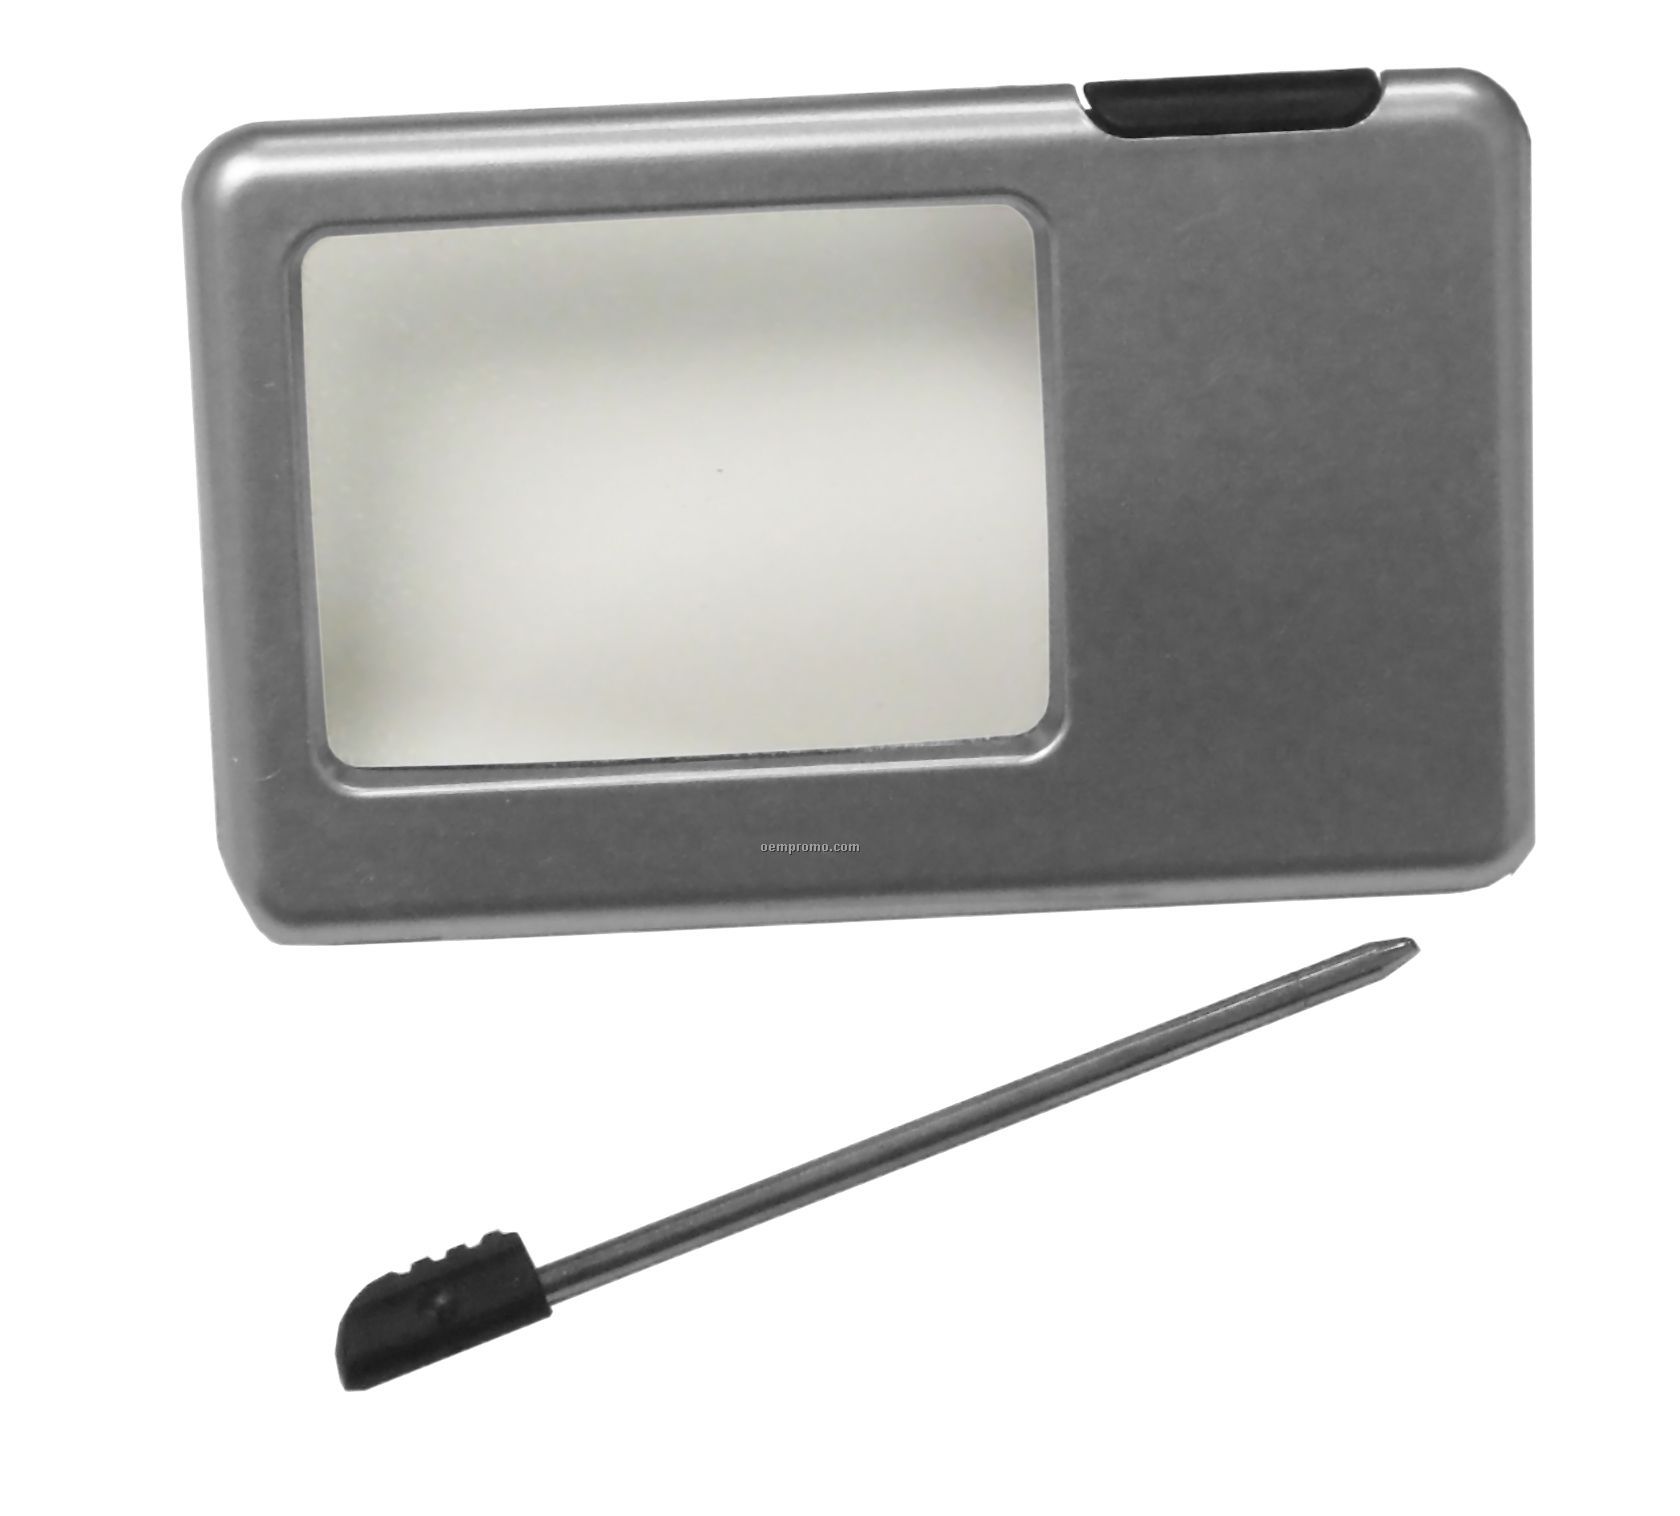 LED Credit Card Sized Magnifier With Stylus Pen